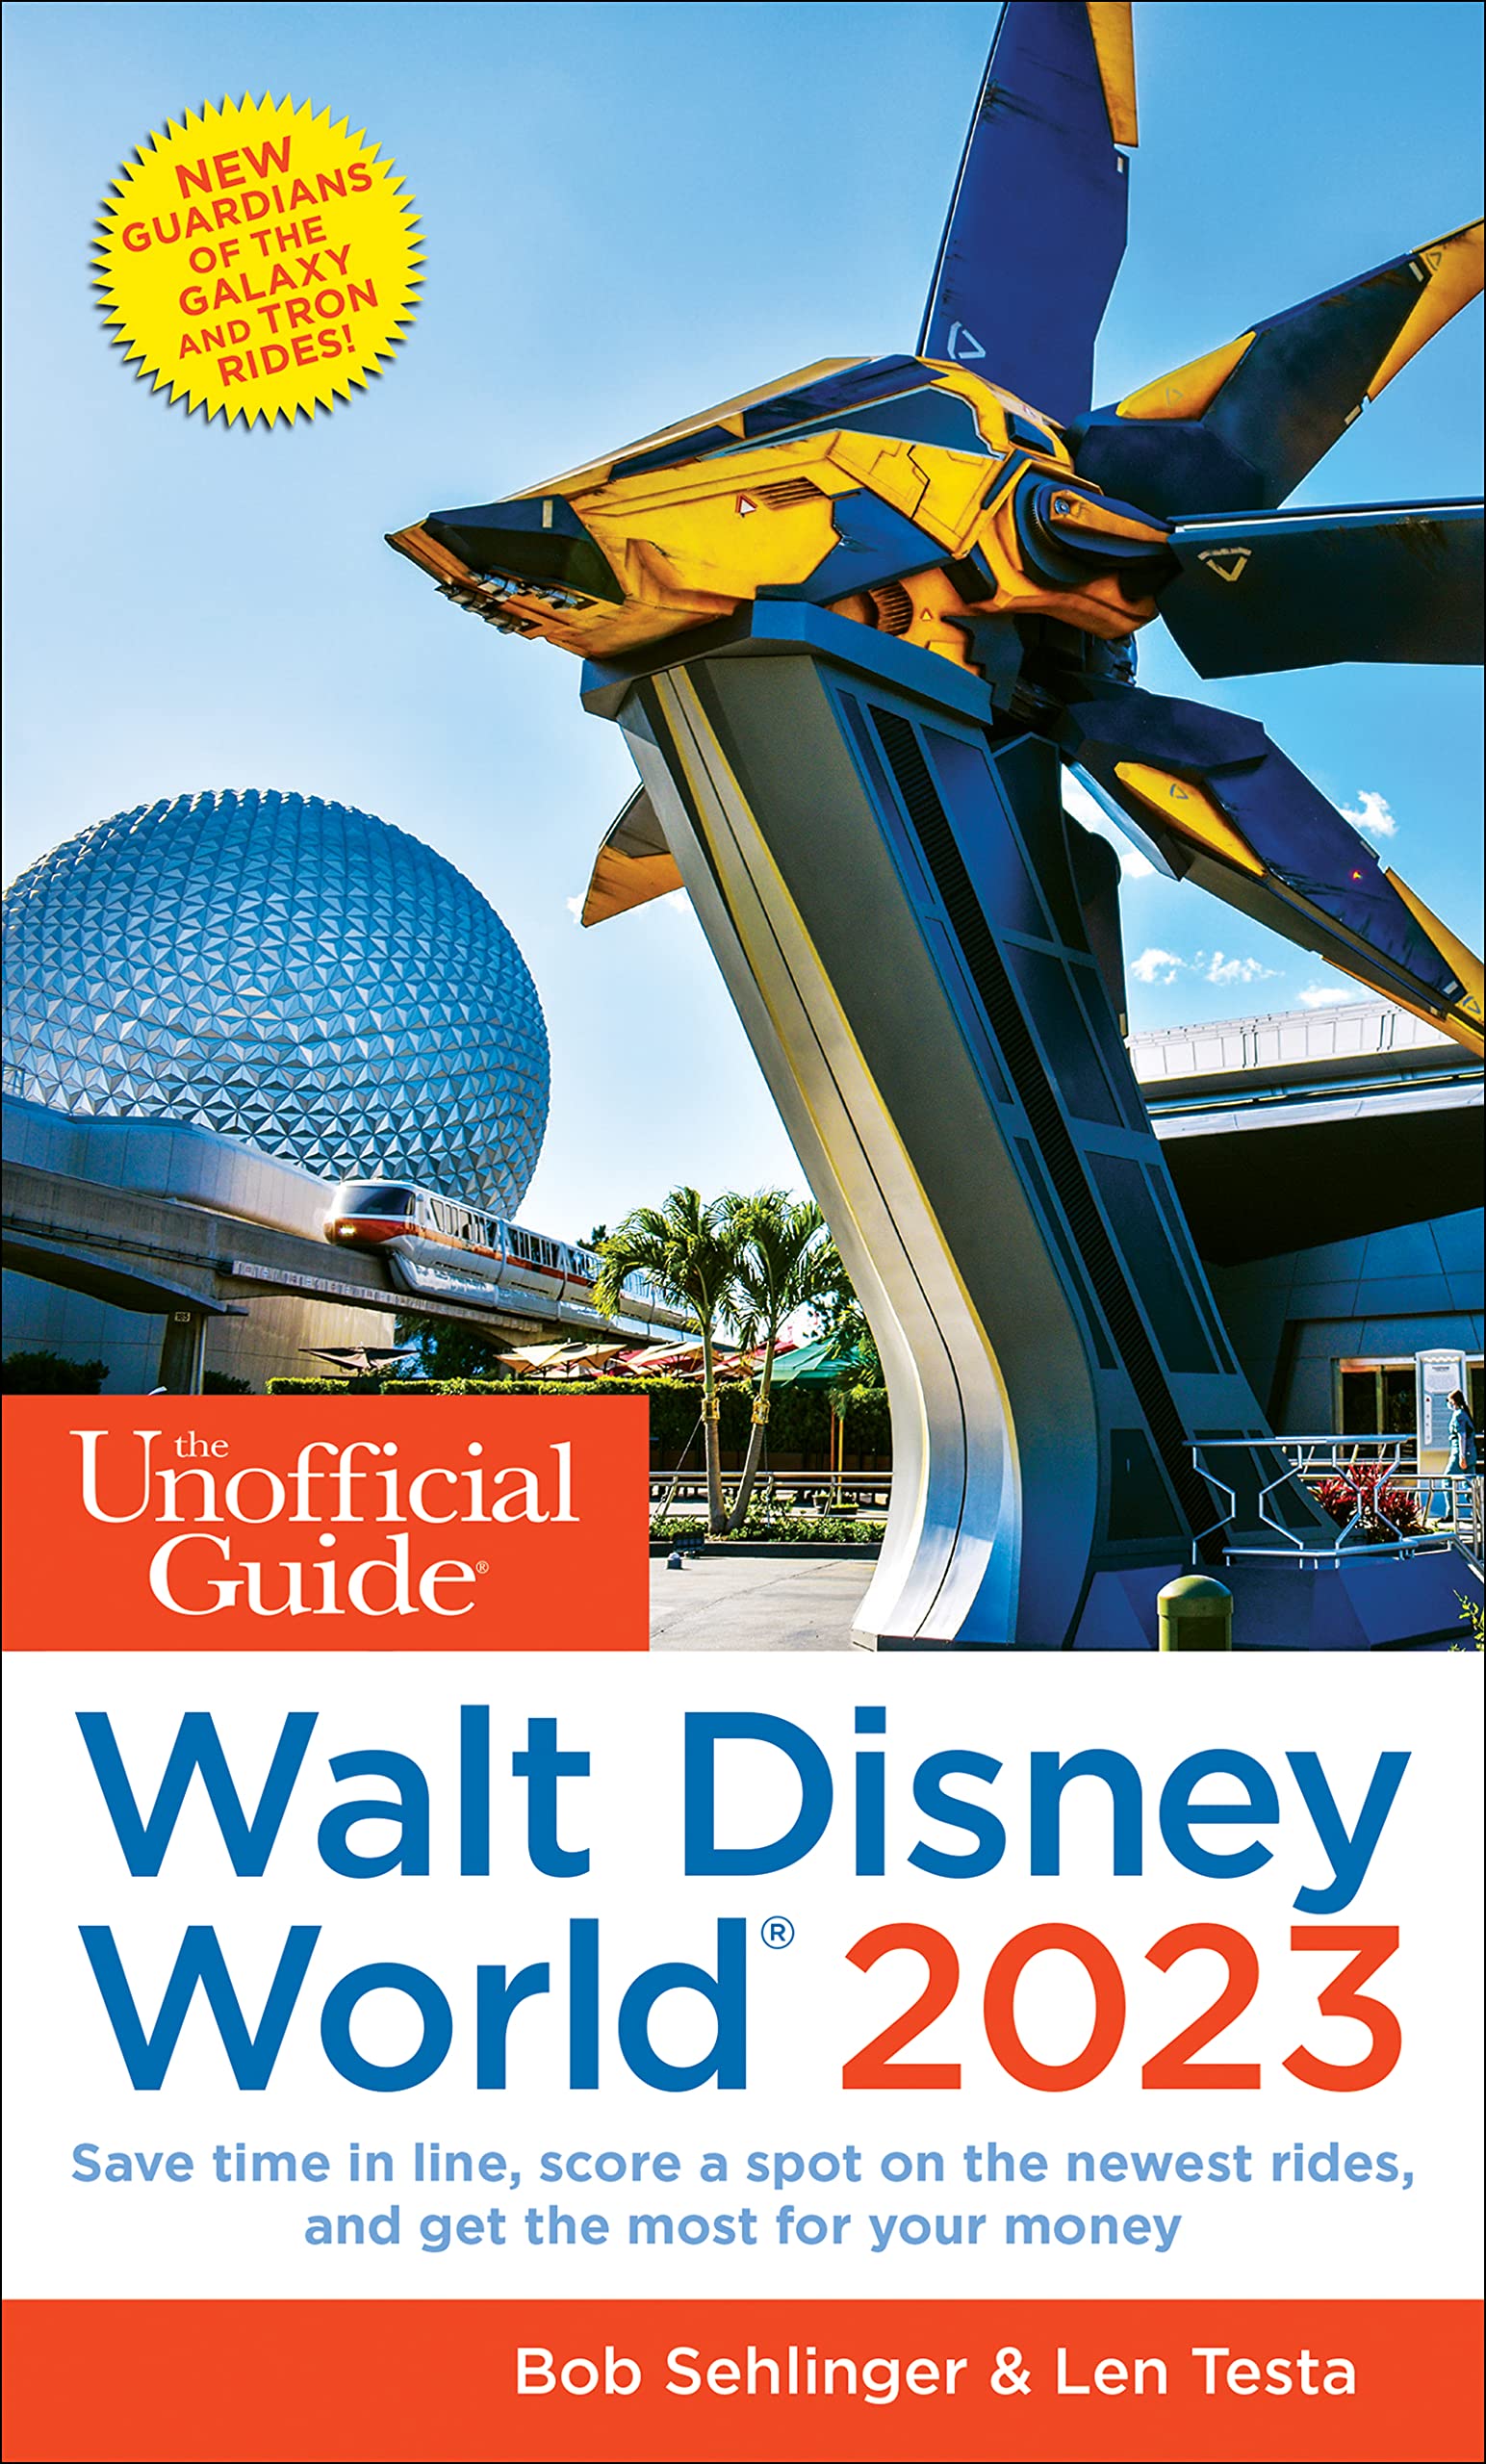 The Unofficial Guide to Walt Disney World 2023 (Unofficial Guides